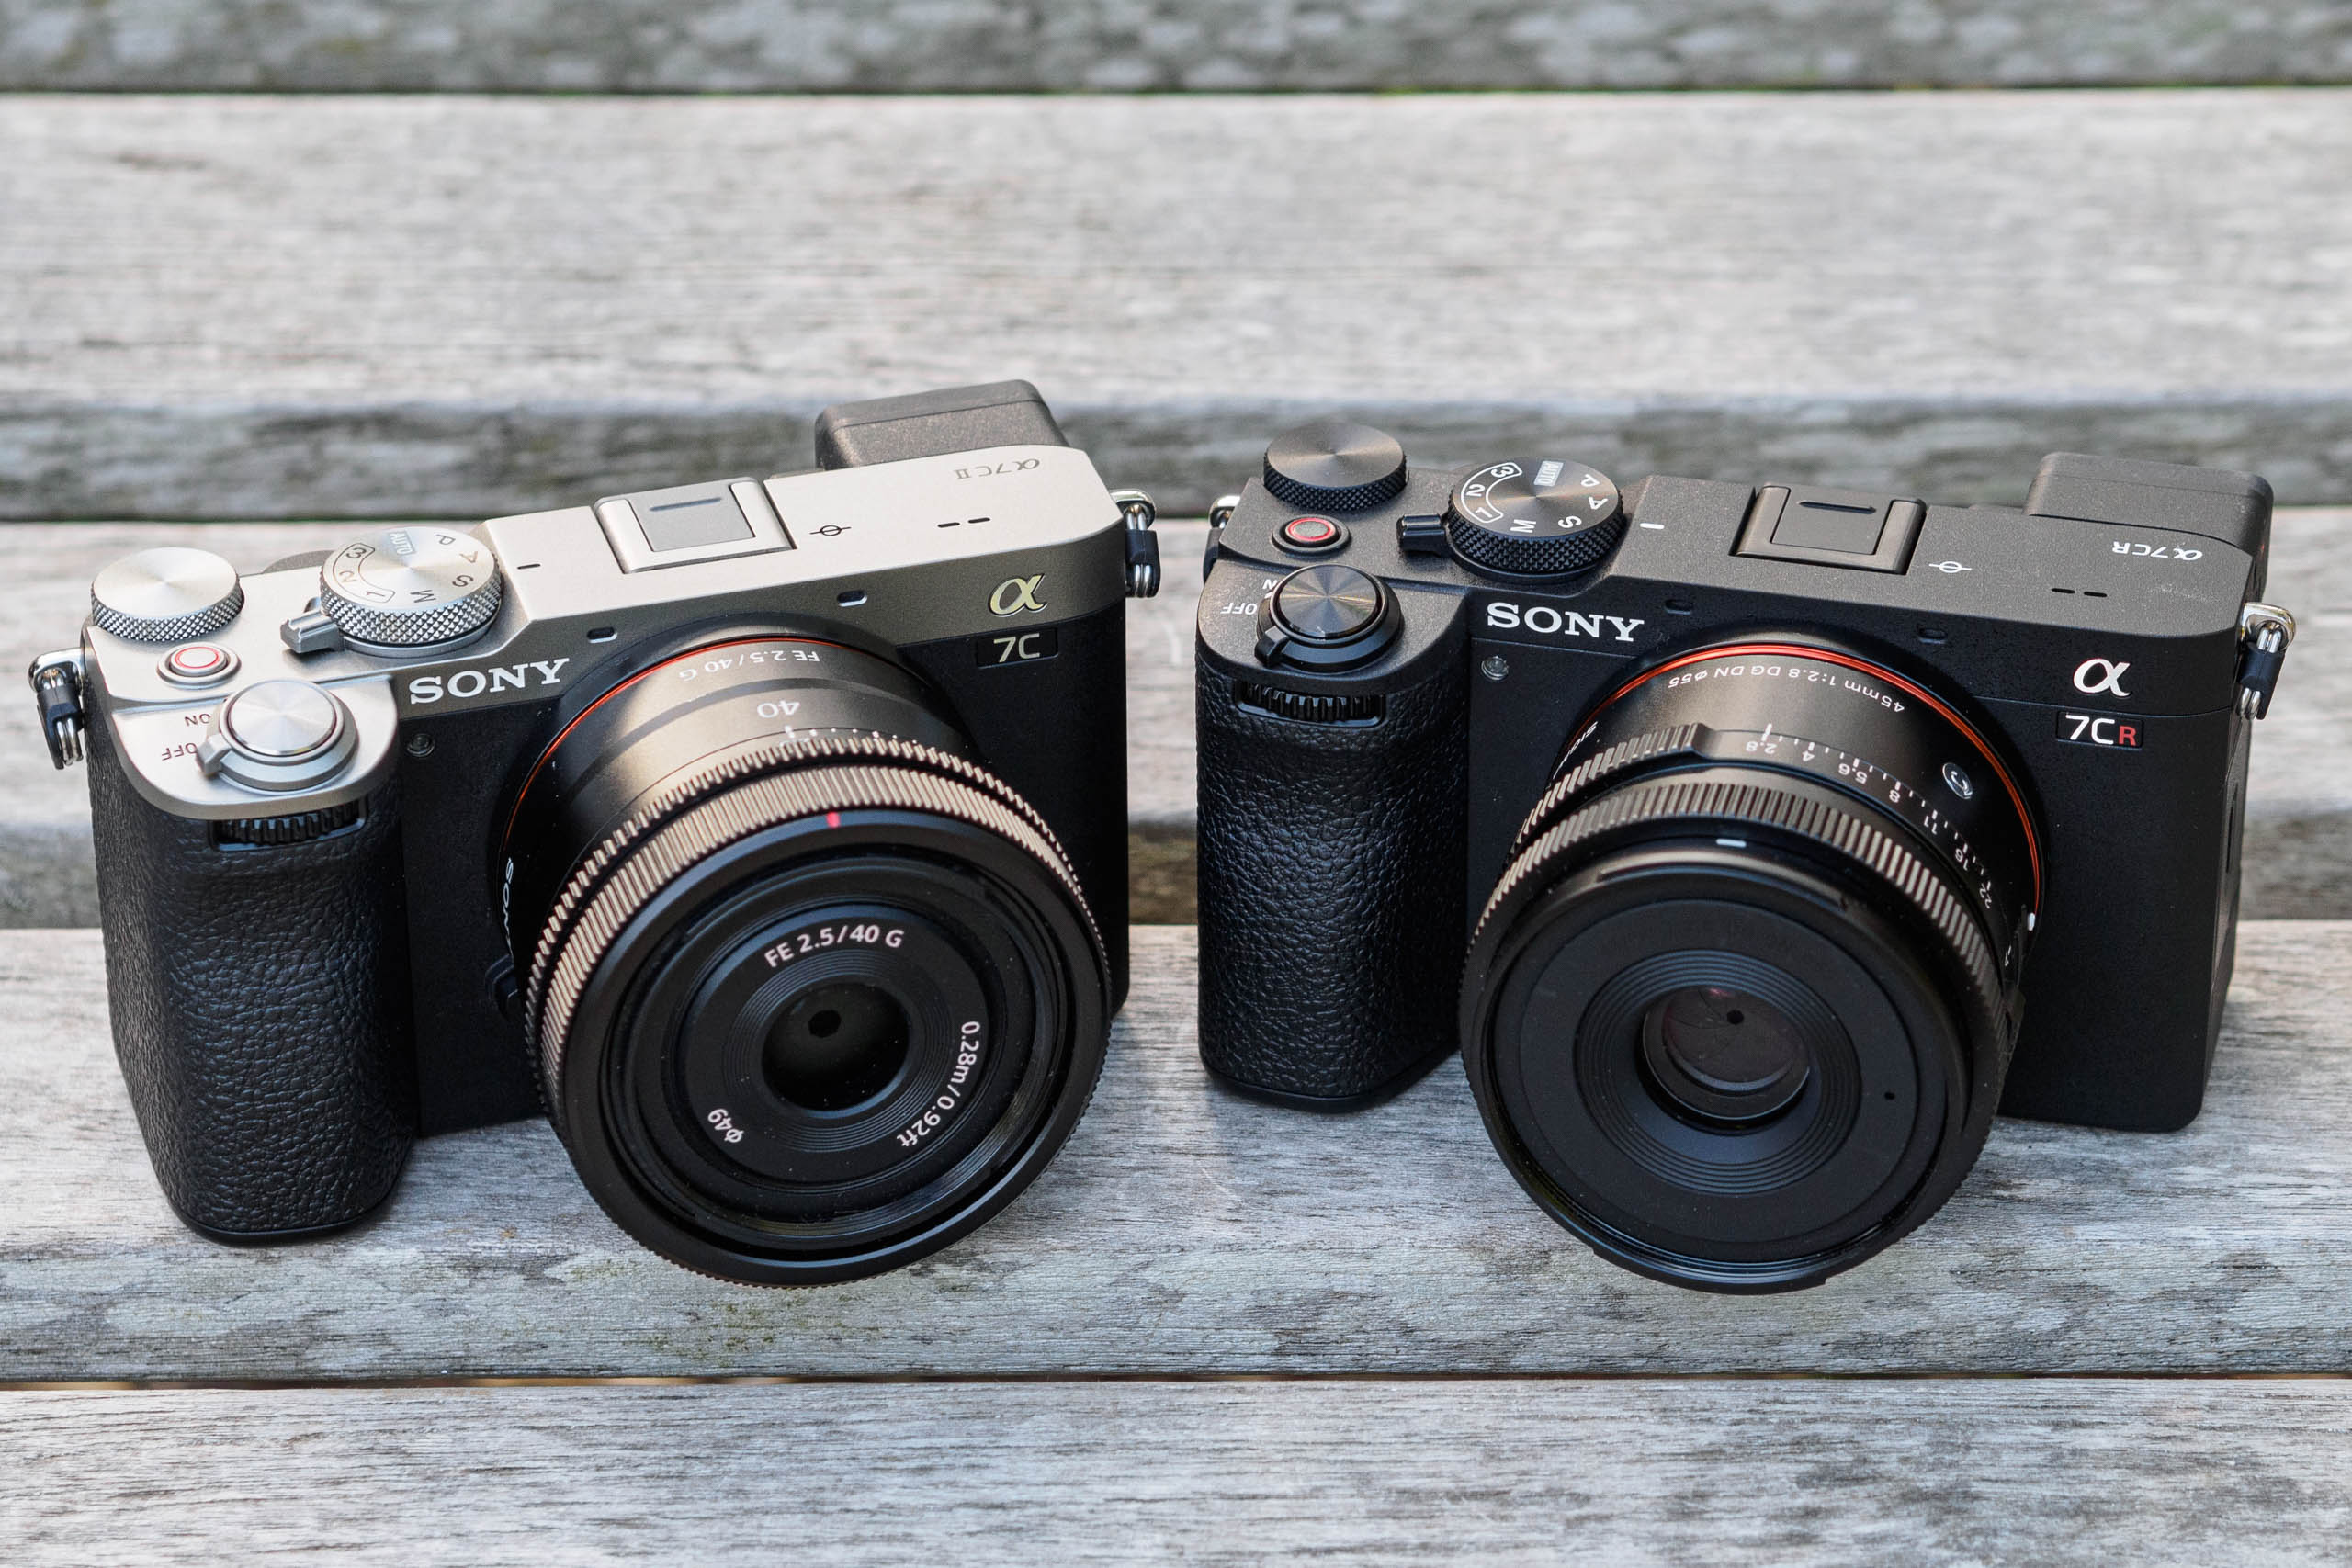 Sony A7C R review: The ultimate travel camera?